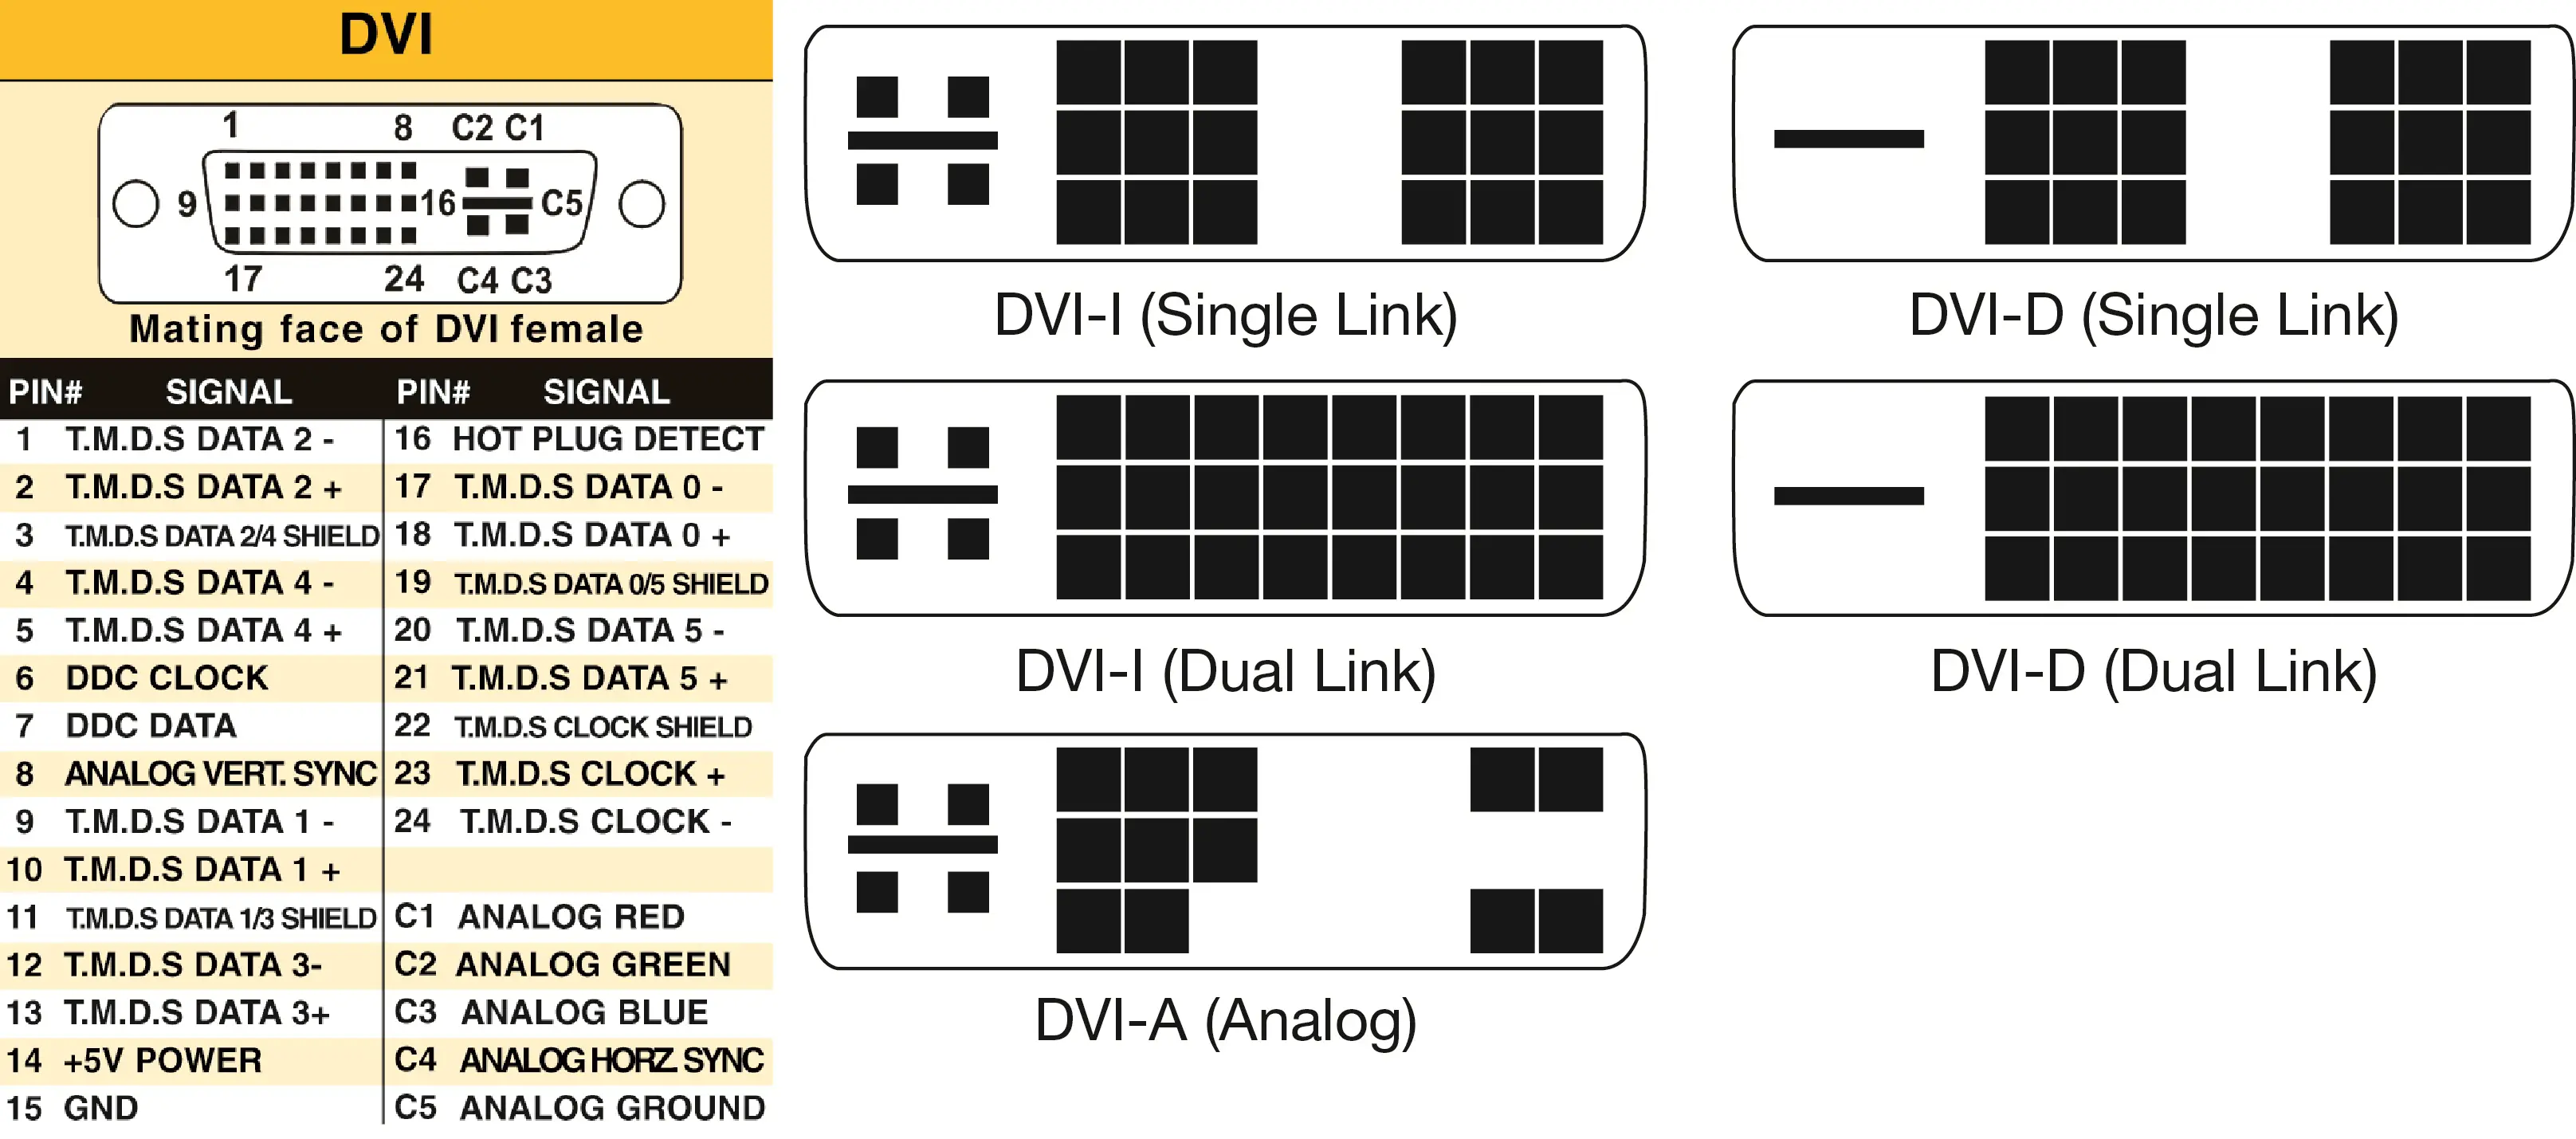 What Is The Difference Between Dvi I And Dvi D